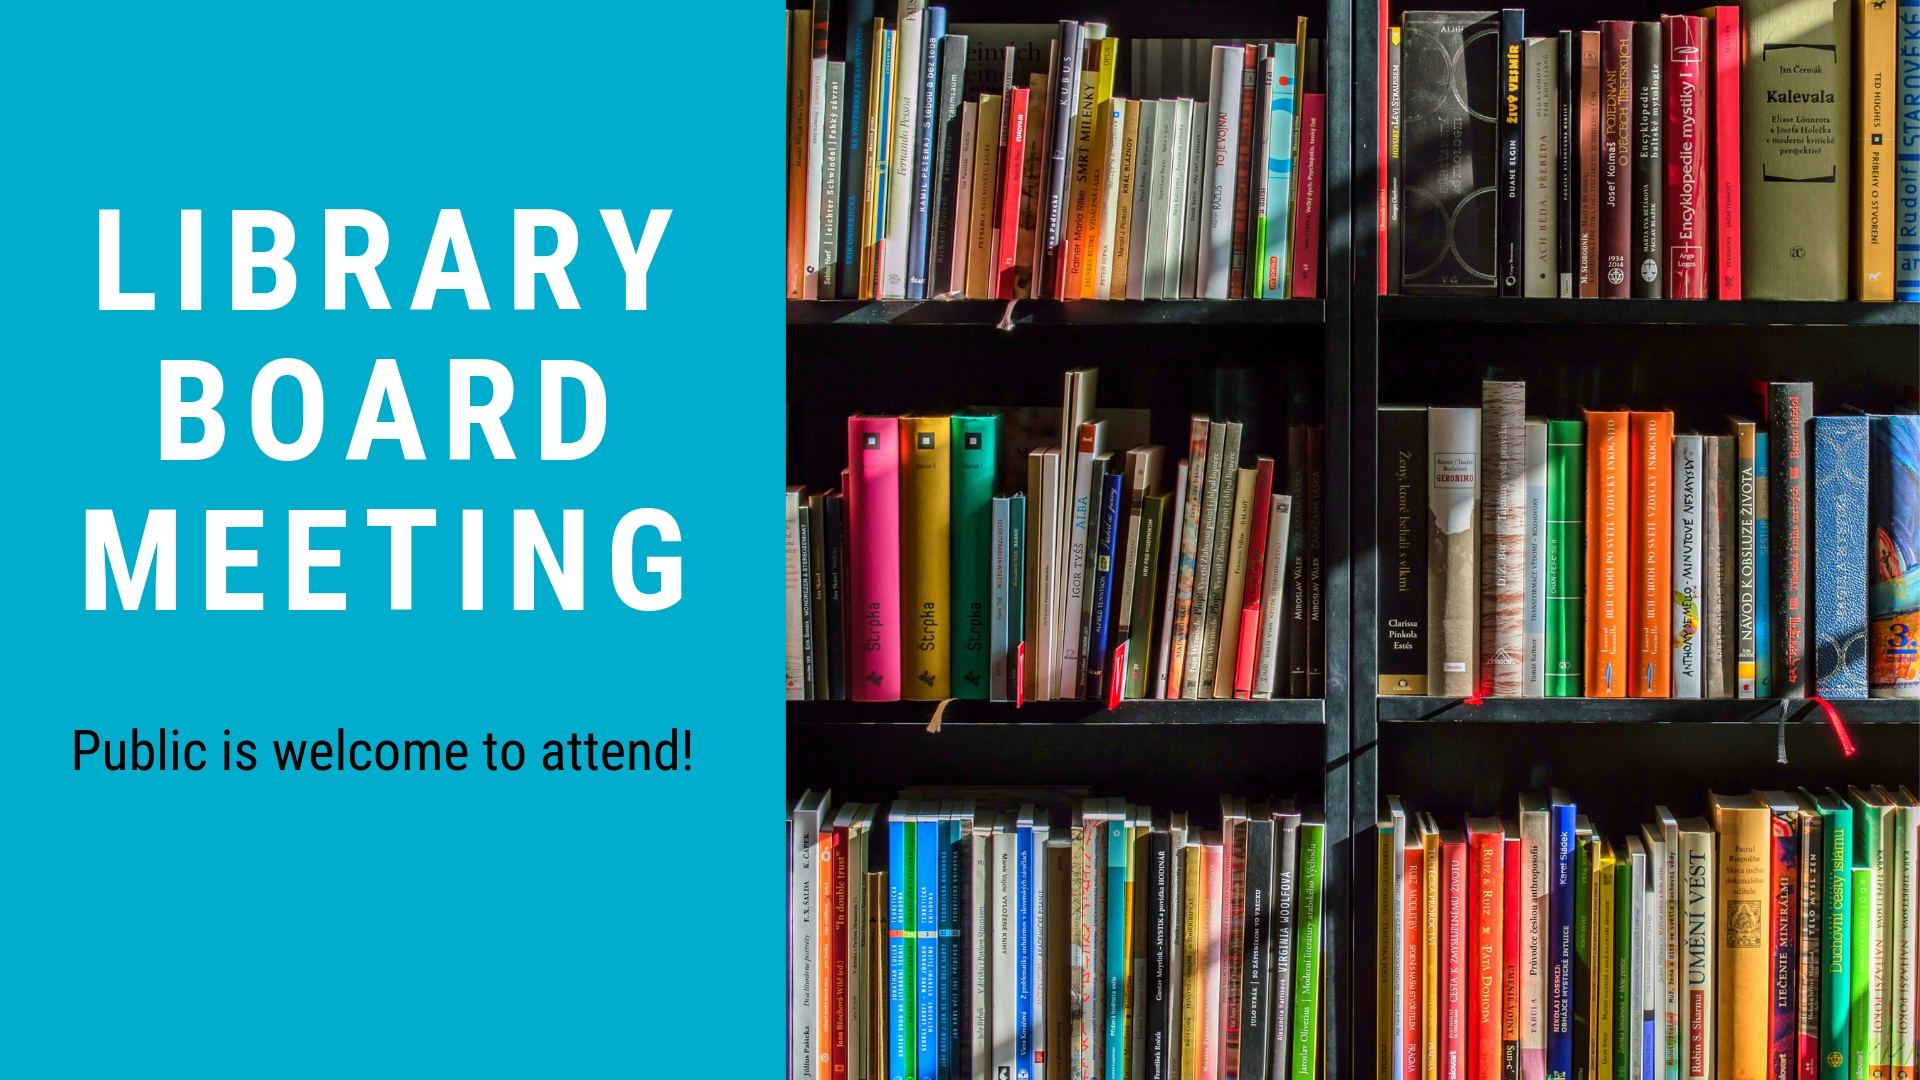 Blue panel on the left, bookshelves on the right. "LIBRARY BOARD MEETING" in white text. "Public is welcome to attend!" in black text.